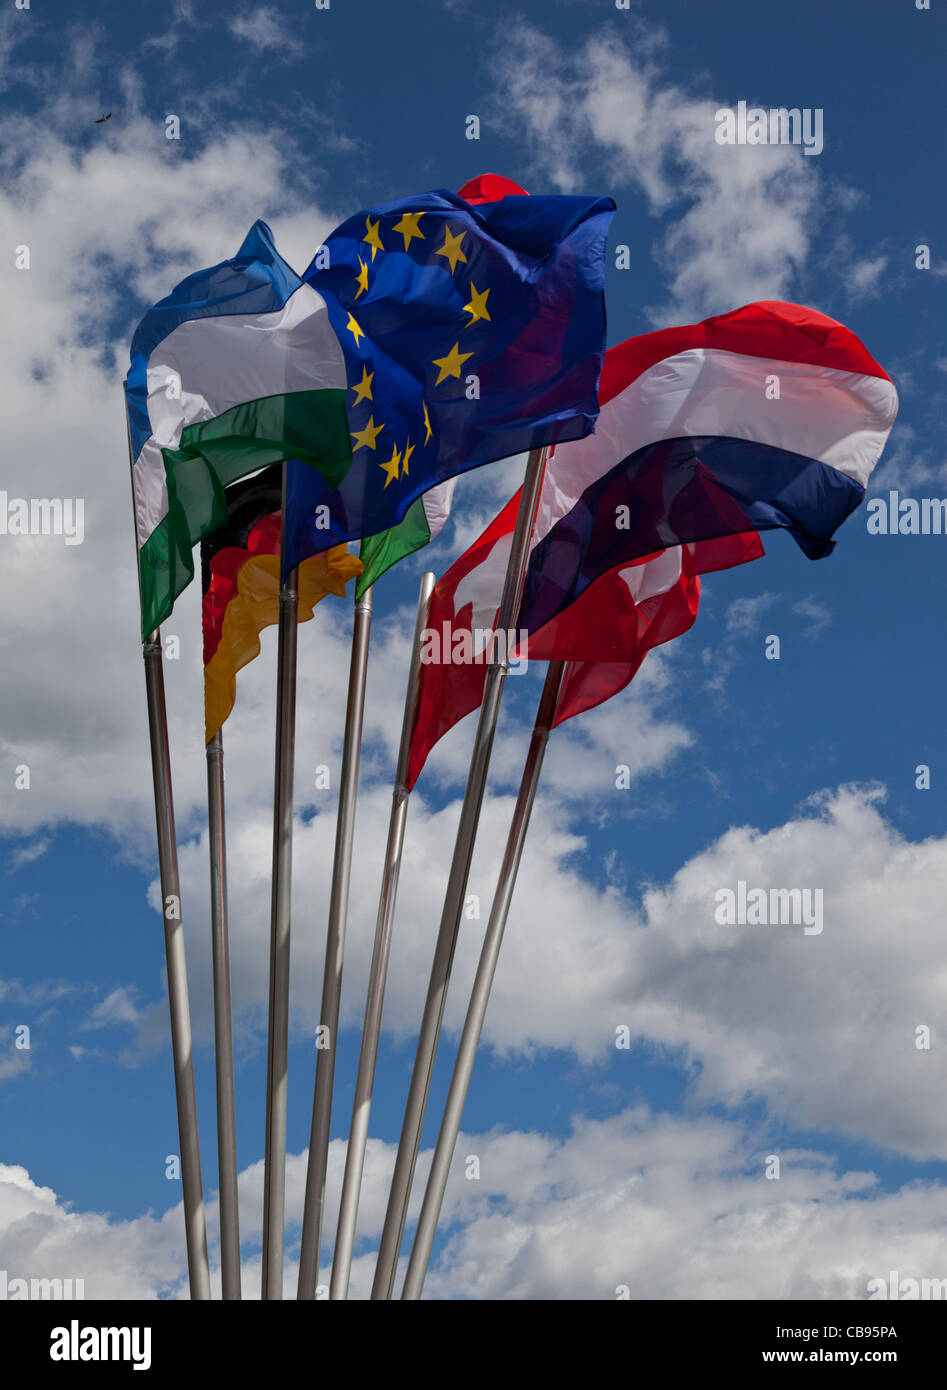 A group of 7 European flags fluttering in the wind against blue sky and clouds Stock Photo